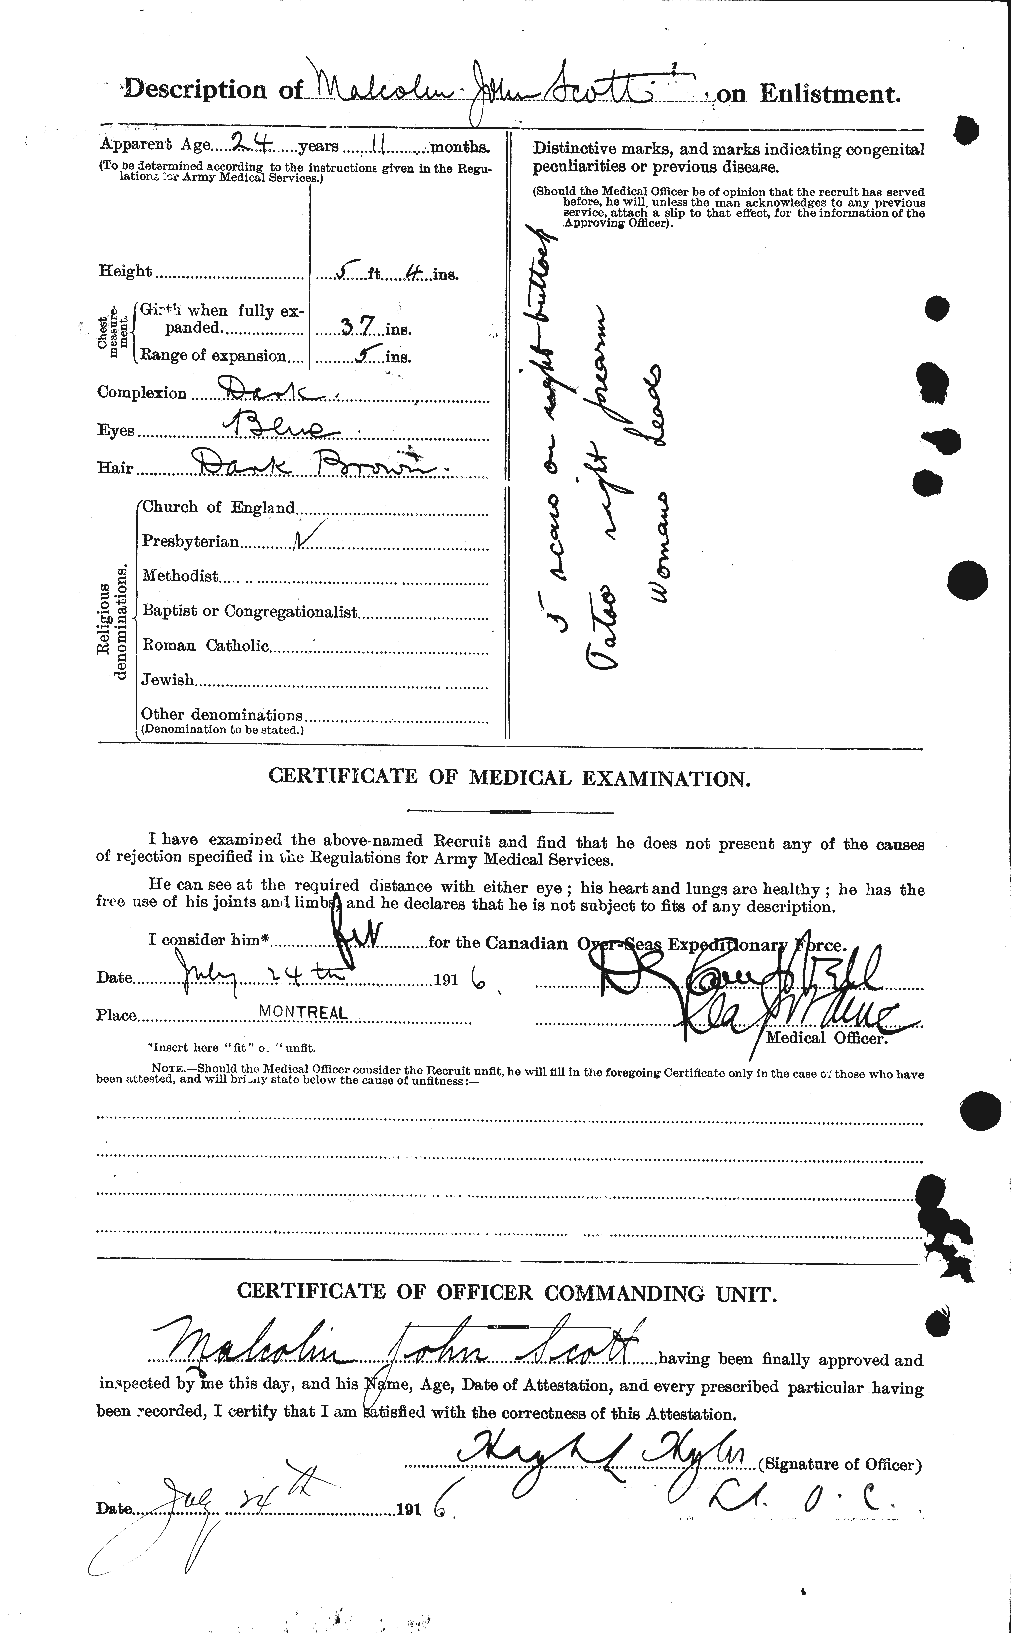 Personnel Records of the First World War - CEF 083515b